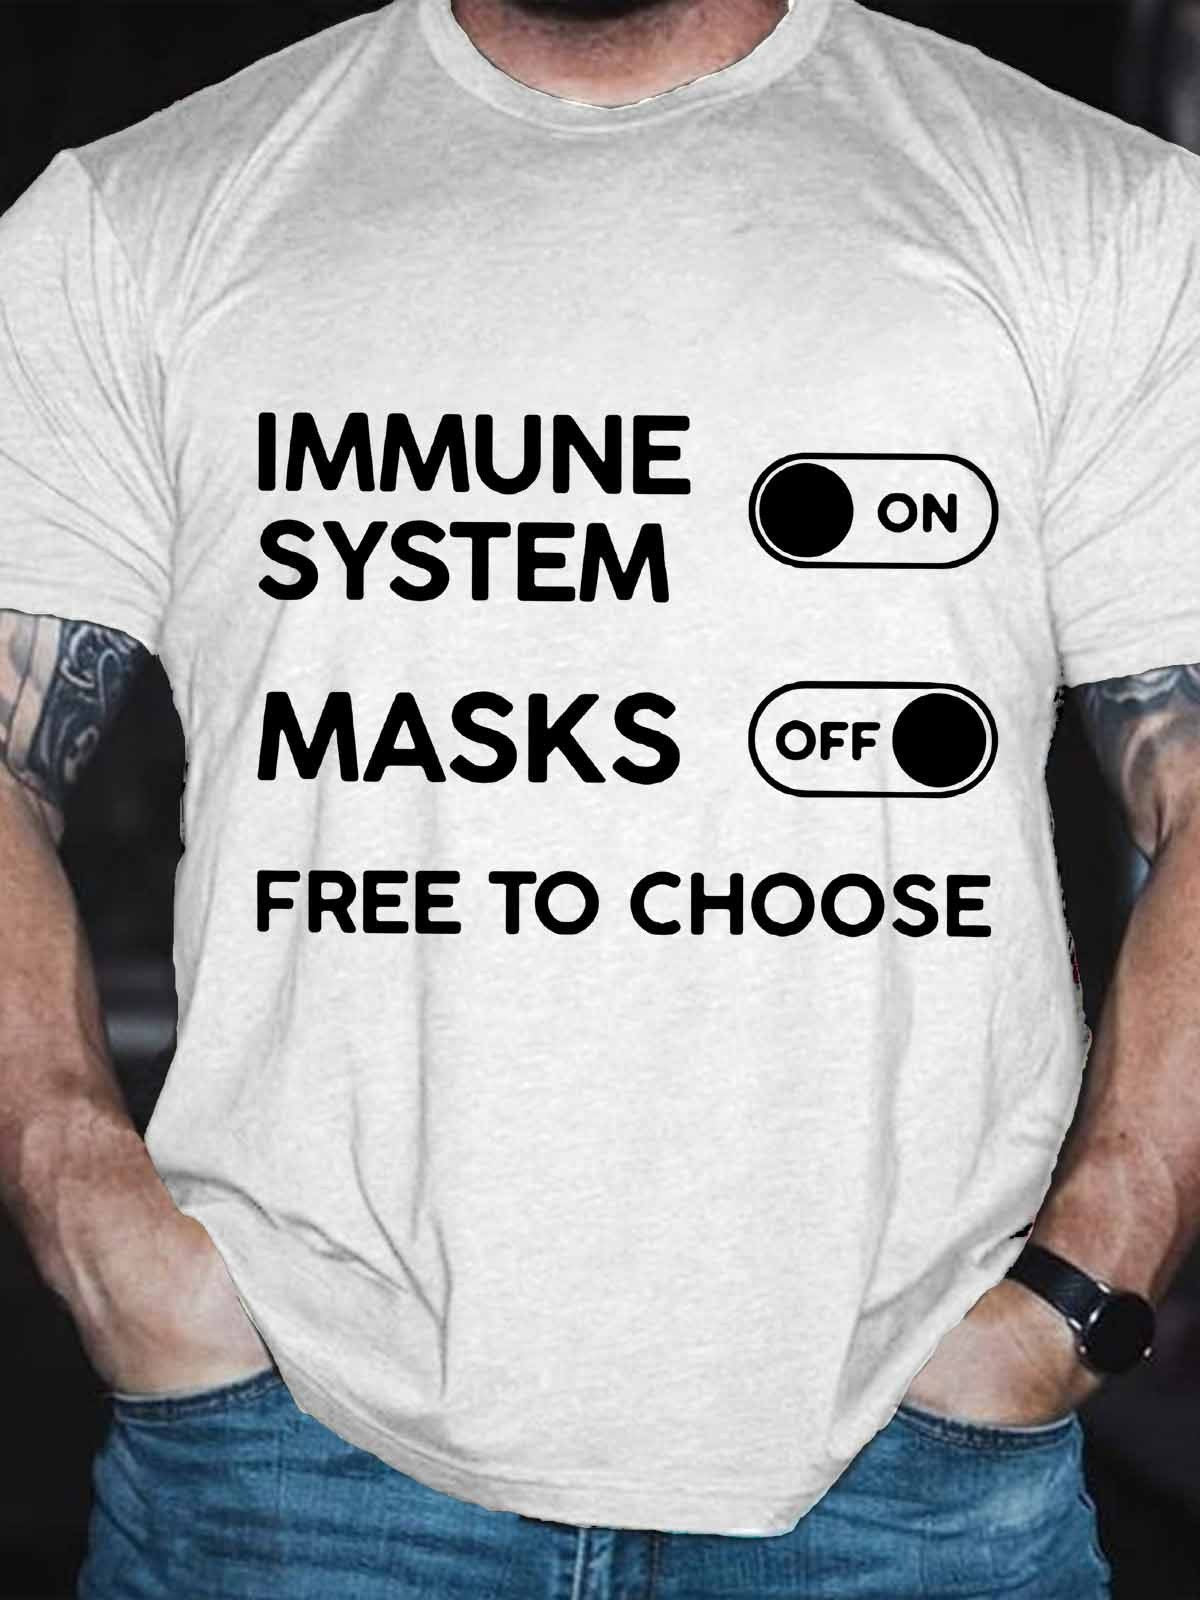 Men's Funny Immune System On Masks Off Free To Choose Tee - Outlets Forever